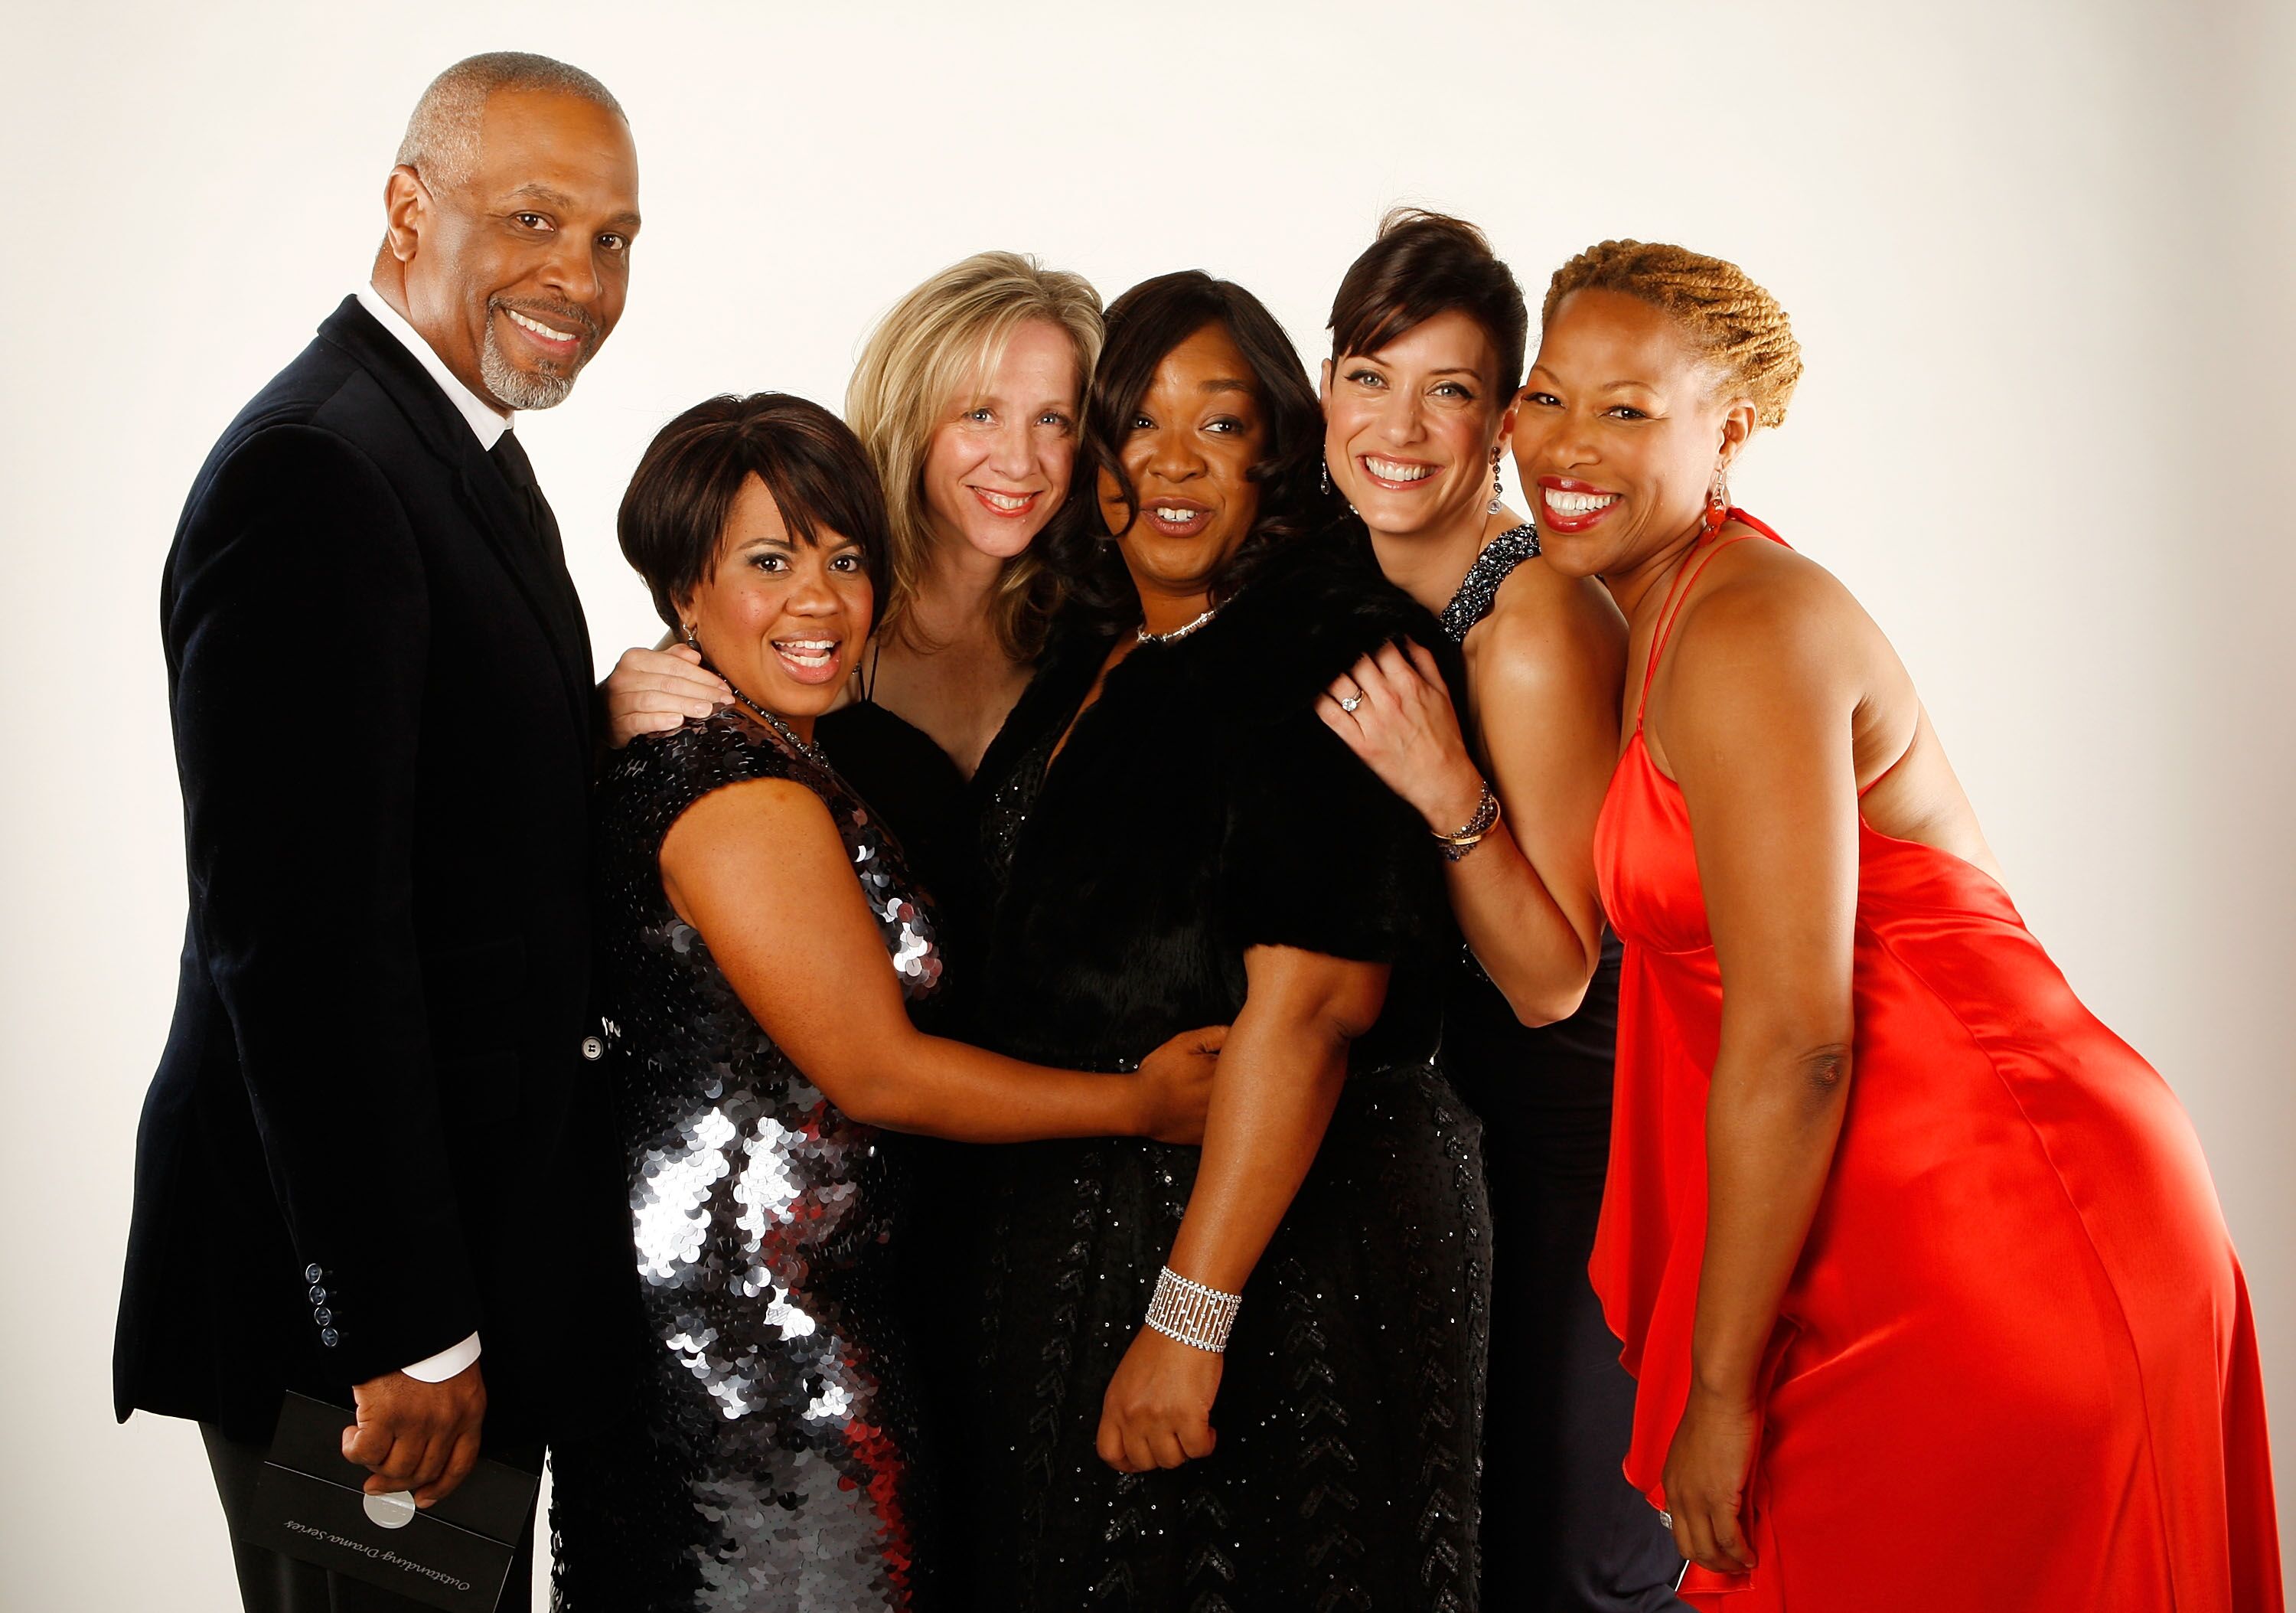 Cast of 'Grey's Anatomy' with producer/writer Shonda Rhimes at the 39th NAACP Image Awards on February 14, 2008. | Source: Getty Images